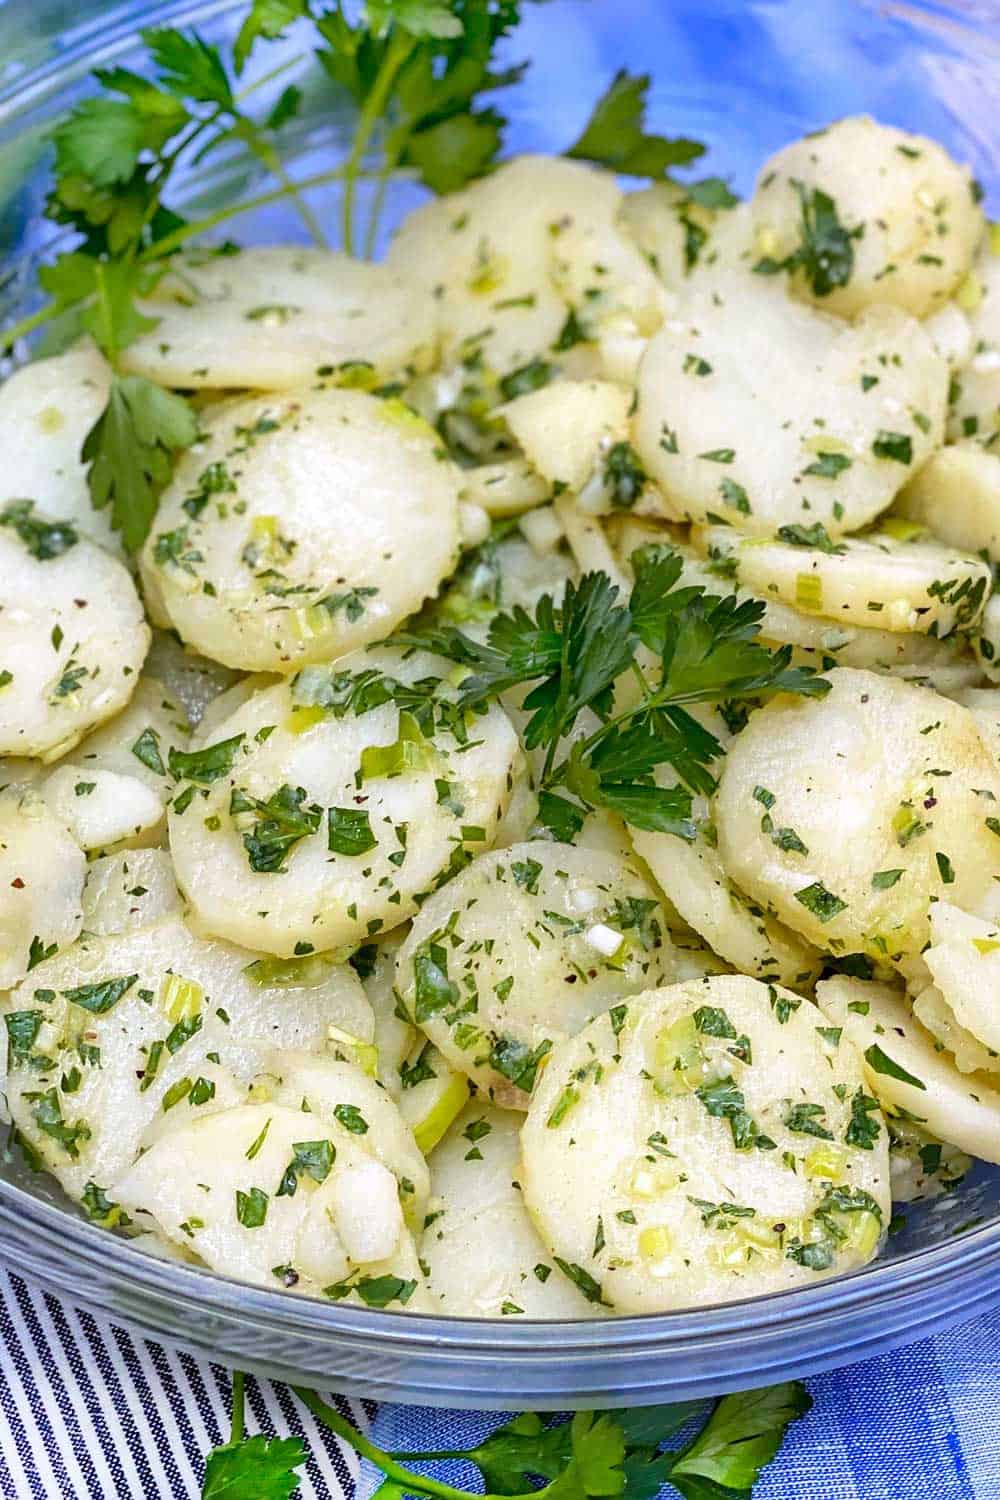 Close up looking down into a bowl of french potato salad, garnished with parsley sprigs